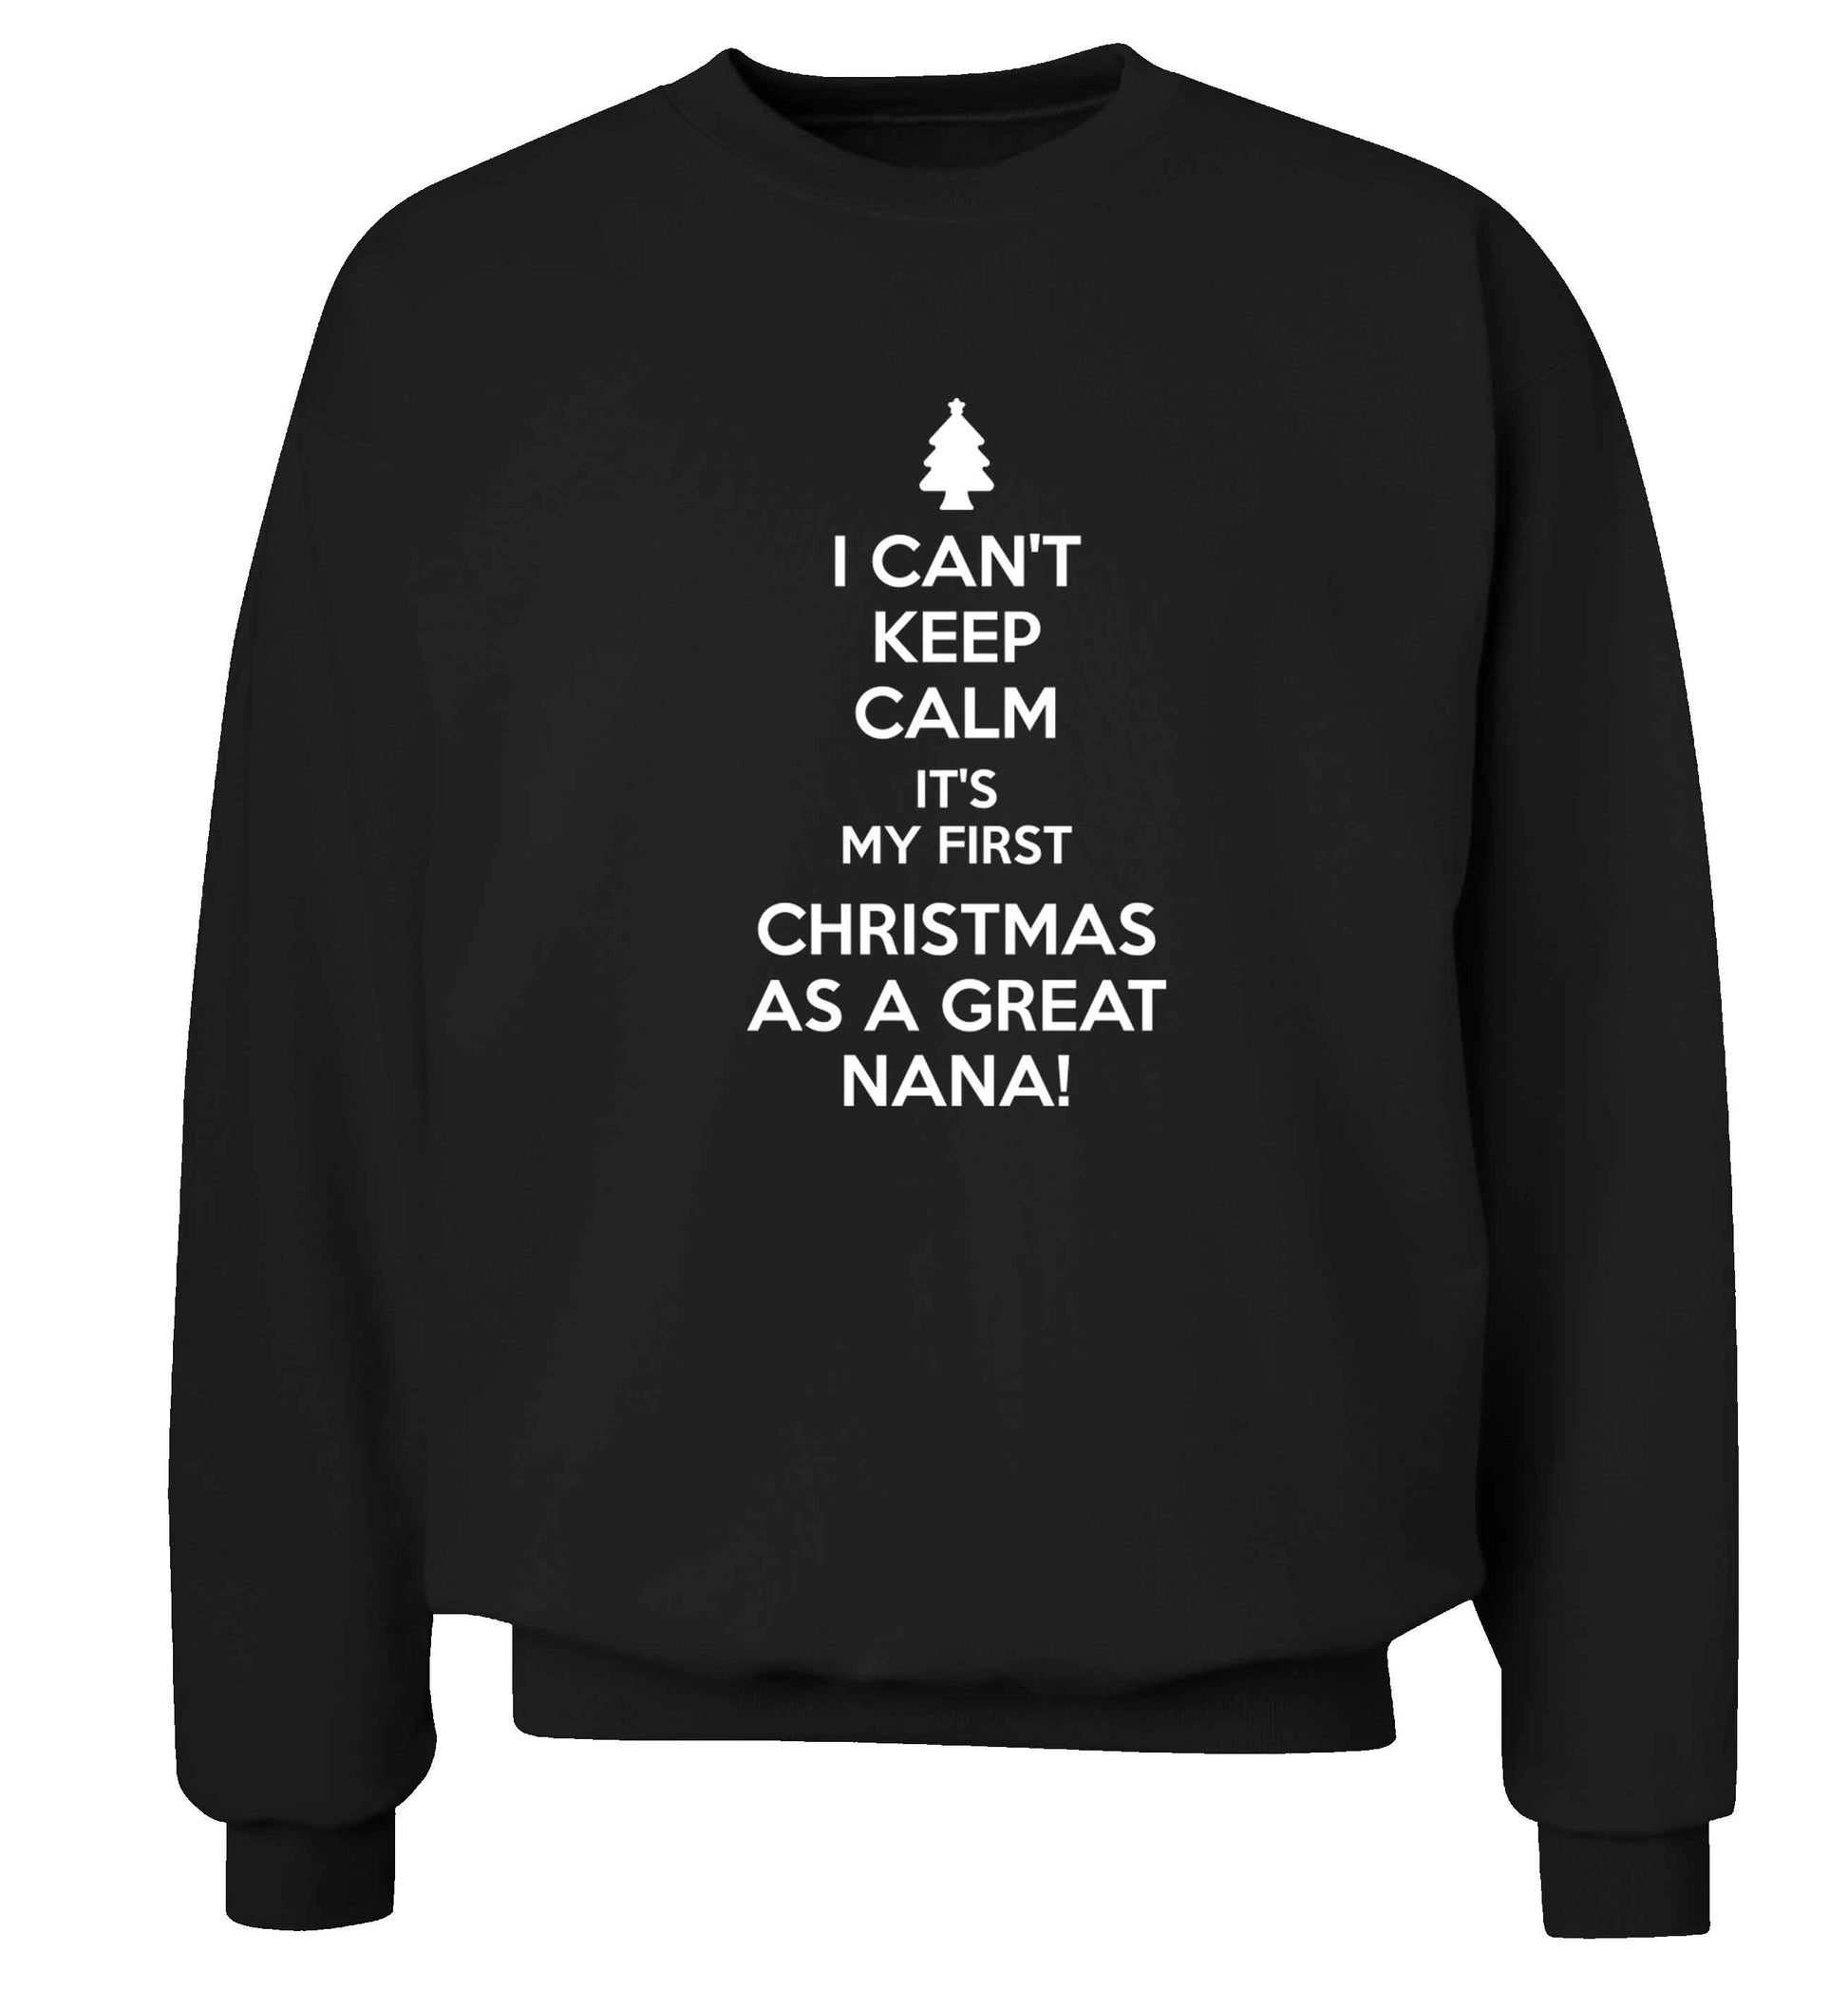 I can't keep calm it's my first Christmas as a great nana! Adult's unisex black Sweater 2XL